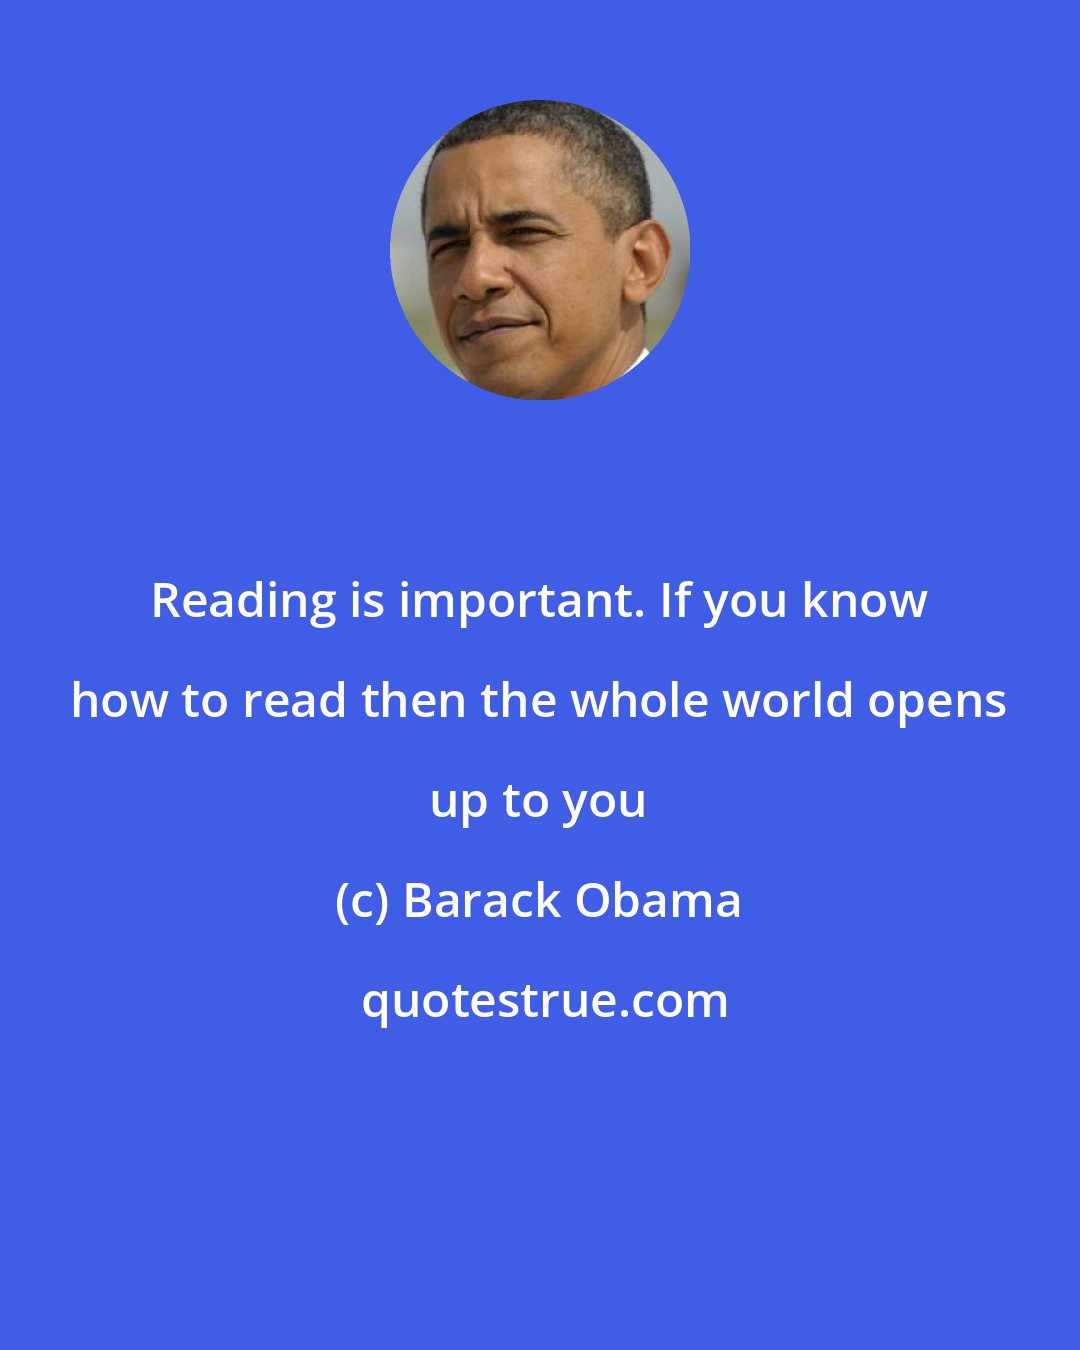 Barack Obama: Reading is important. If you know how to read then the whole world opens up to you